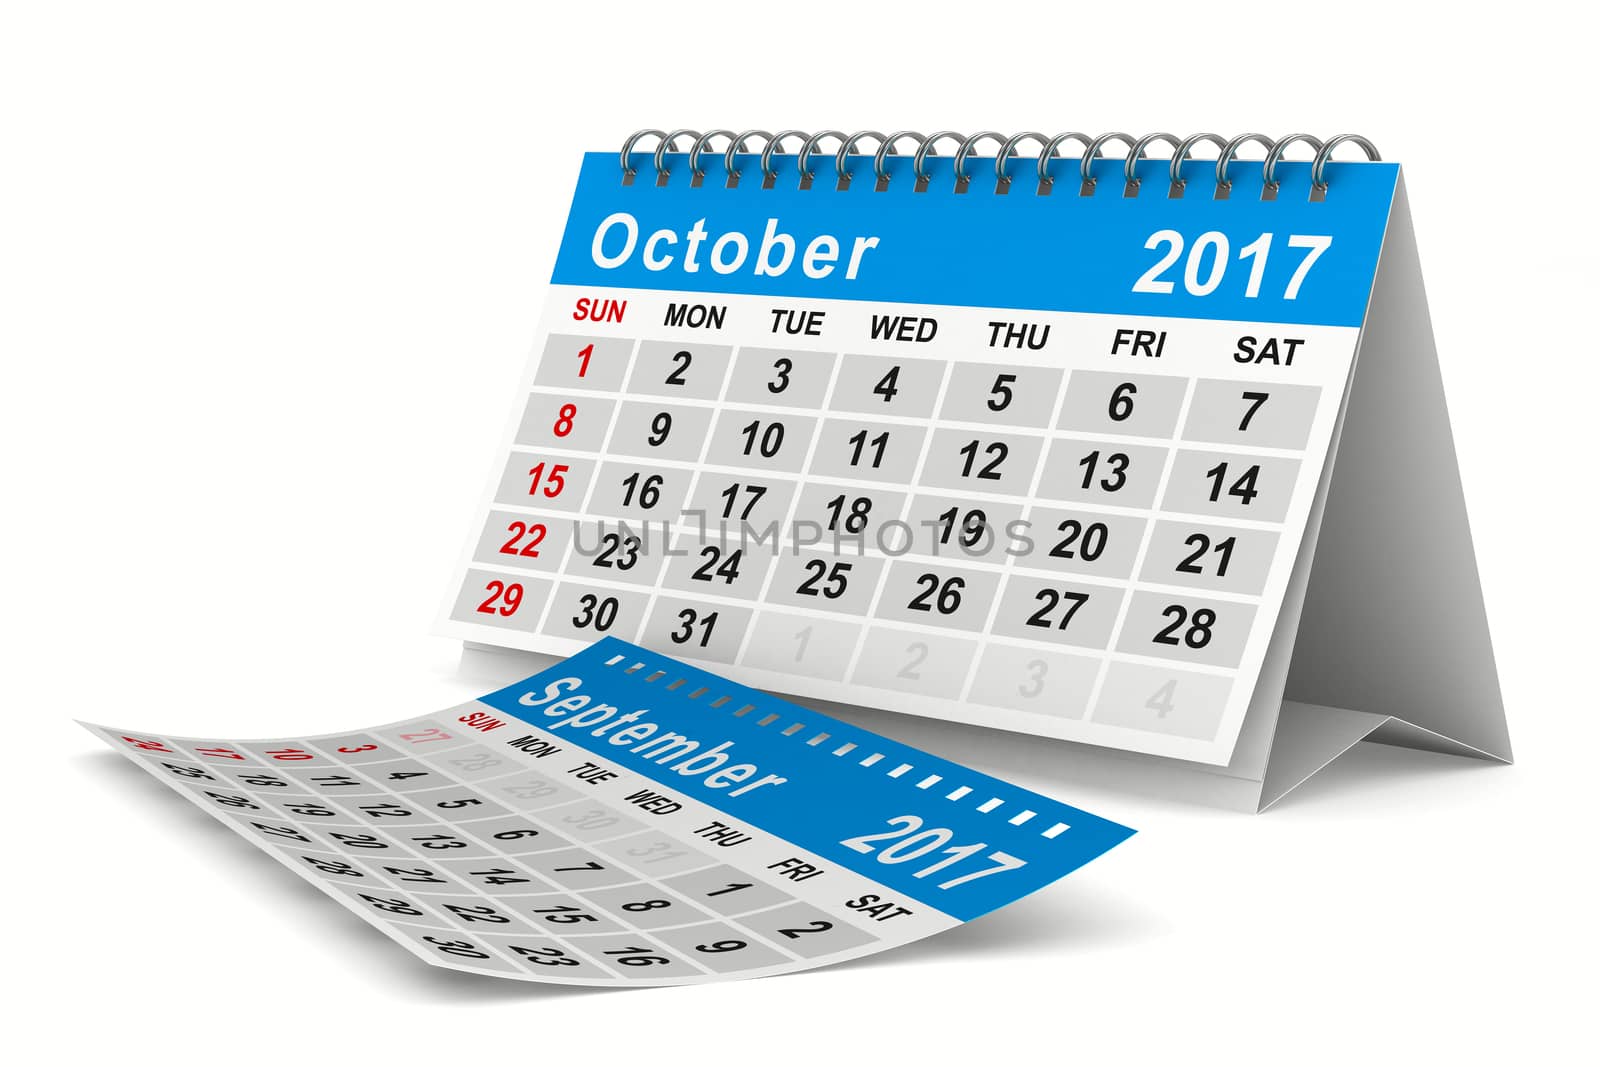 2017 year calendar. October. Isolated 3D image